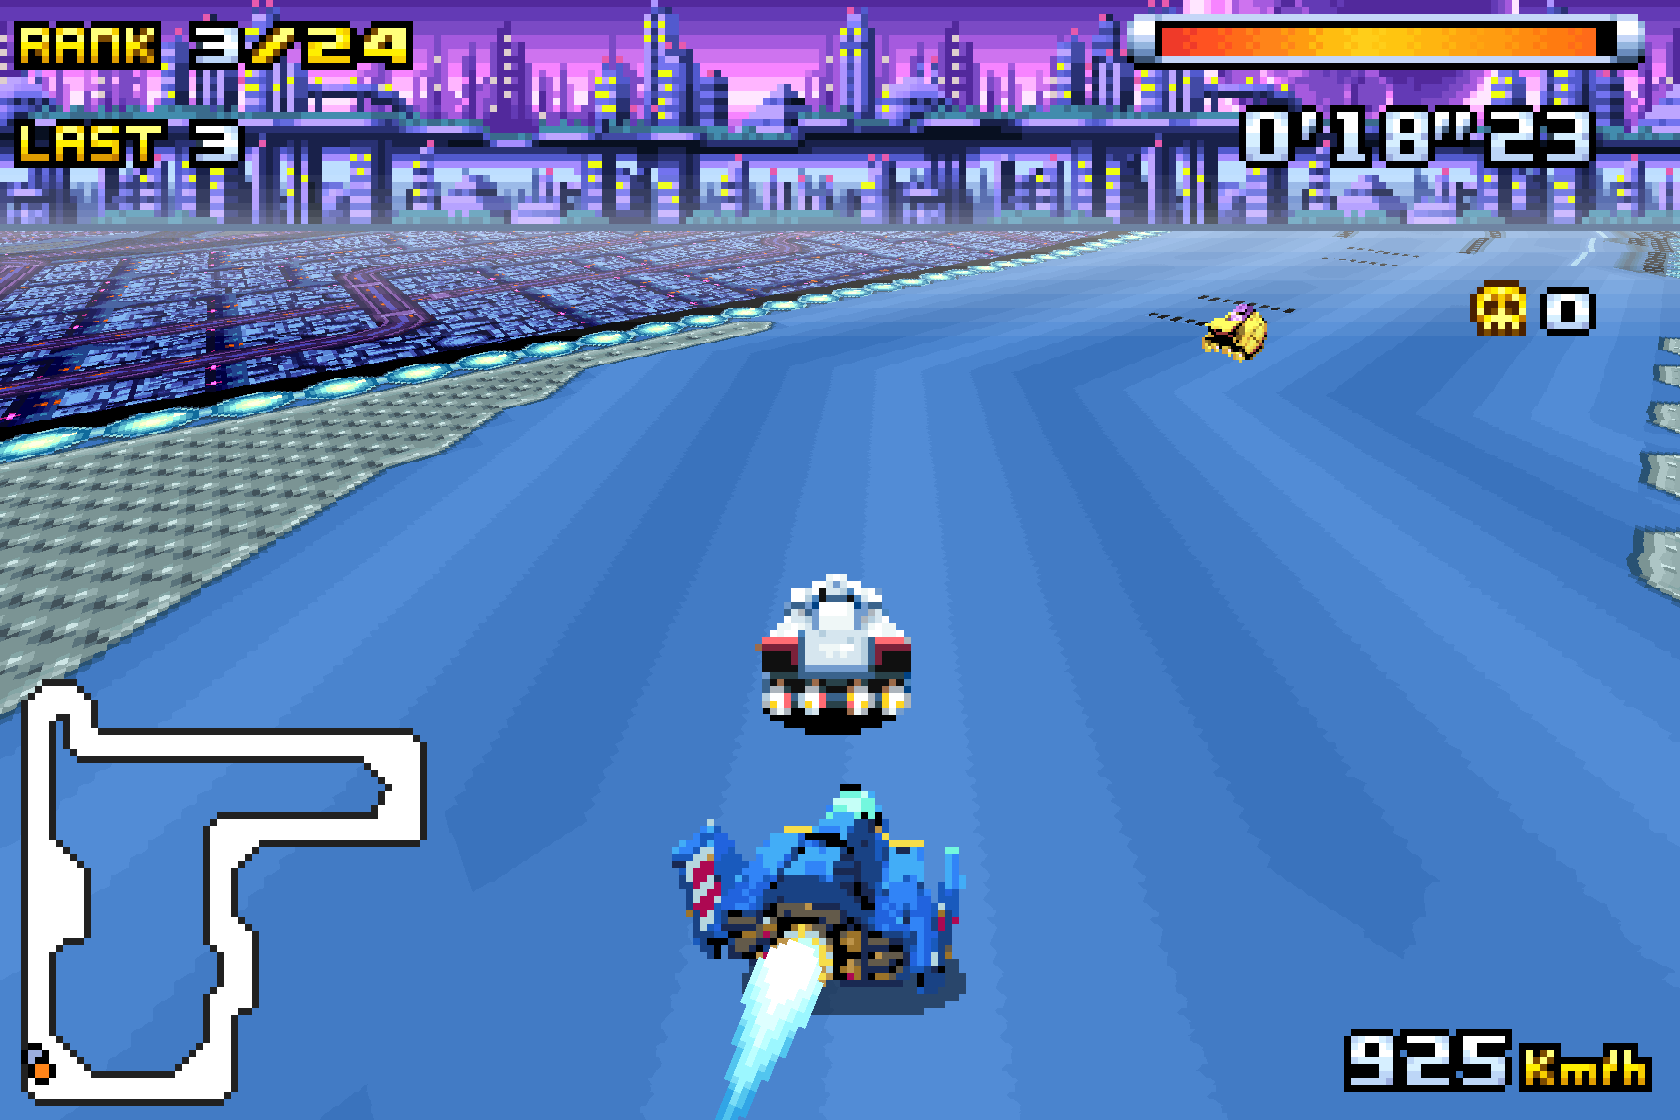 F-Zero: Climax takes advantage of rotated sprites in addition to "mode 7" effects